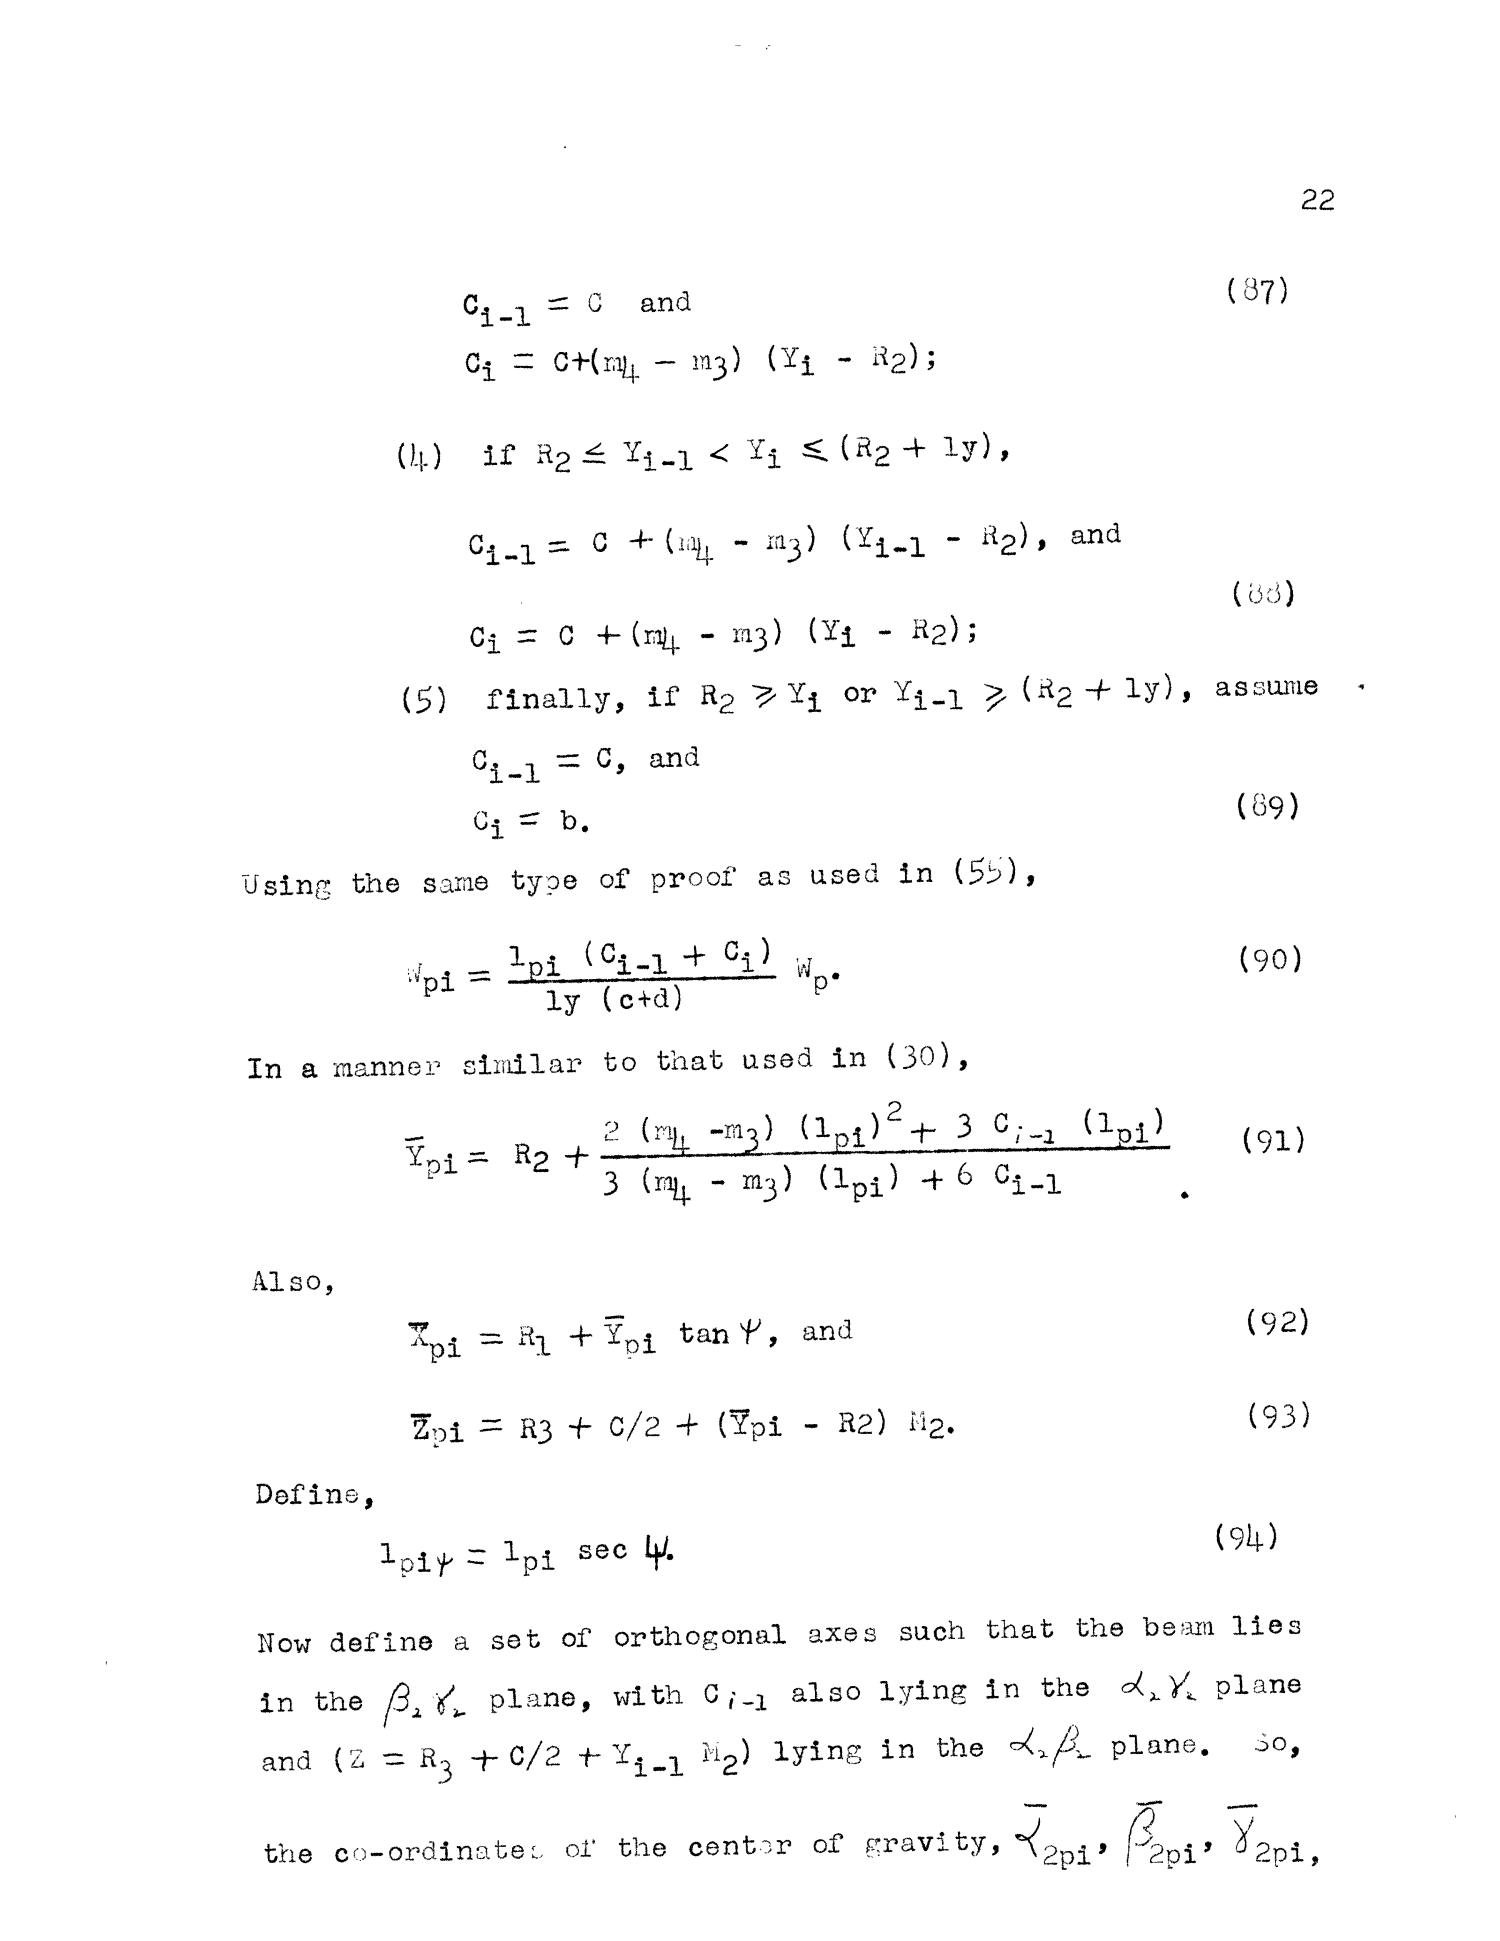 A Numerical Method for the Calculation of the Inertial Loads on an Airplane
                                                
                                                    22
                                                